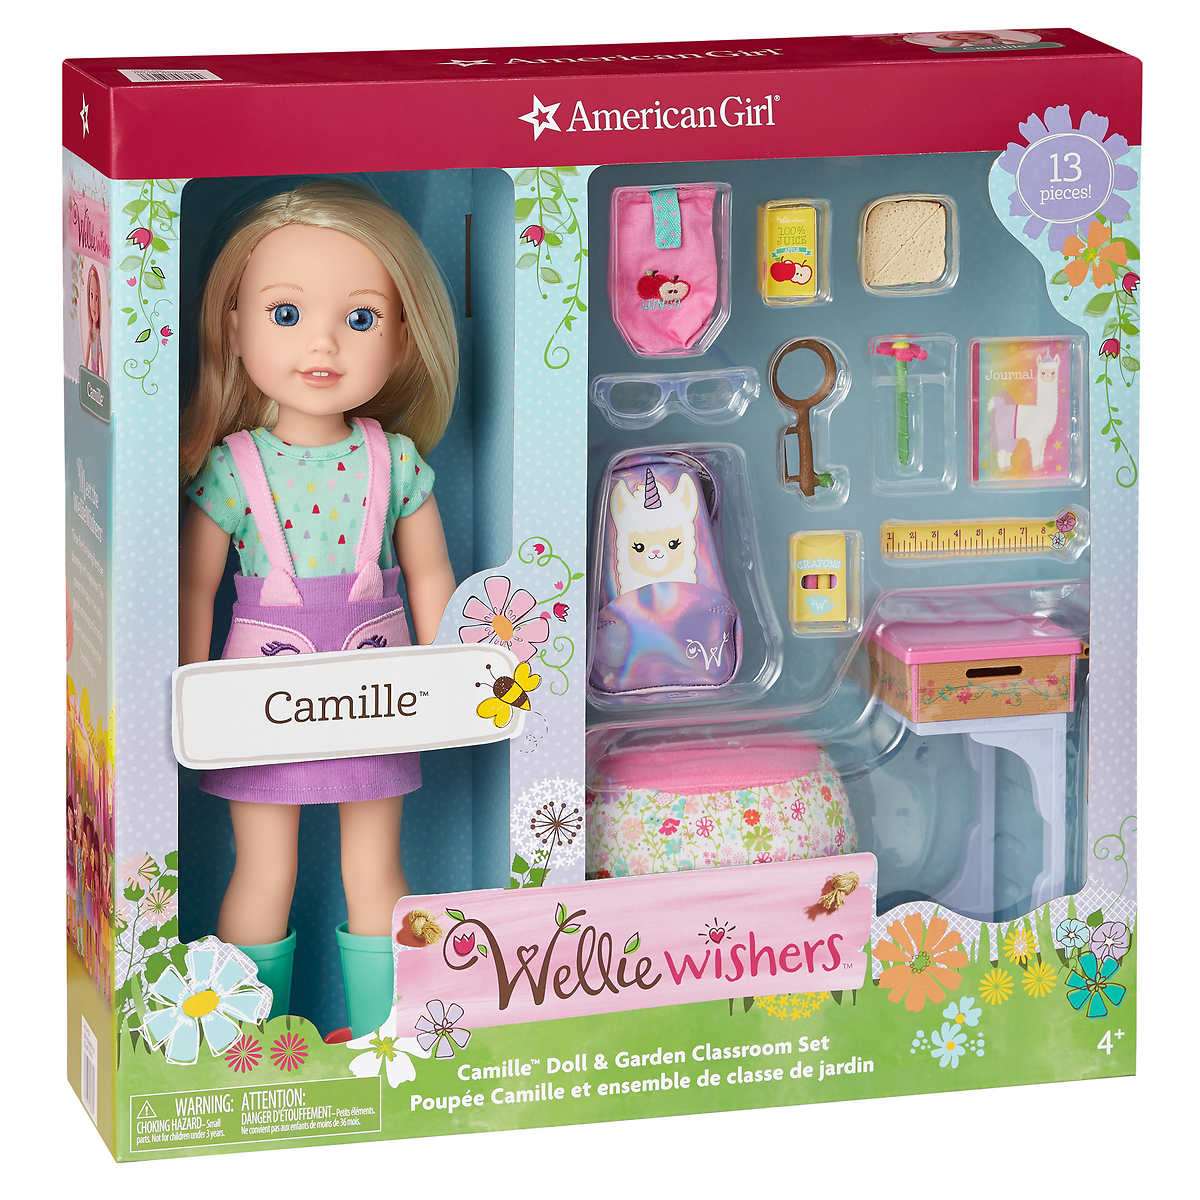 American Girl WellieWishers Camille Doll and School Set